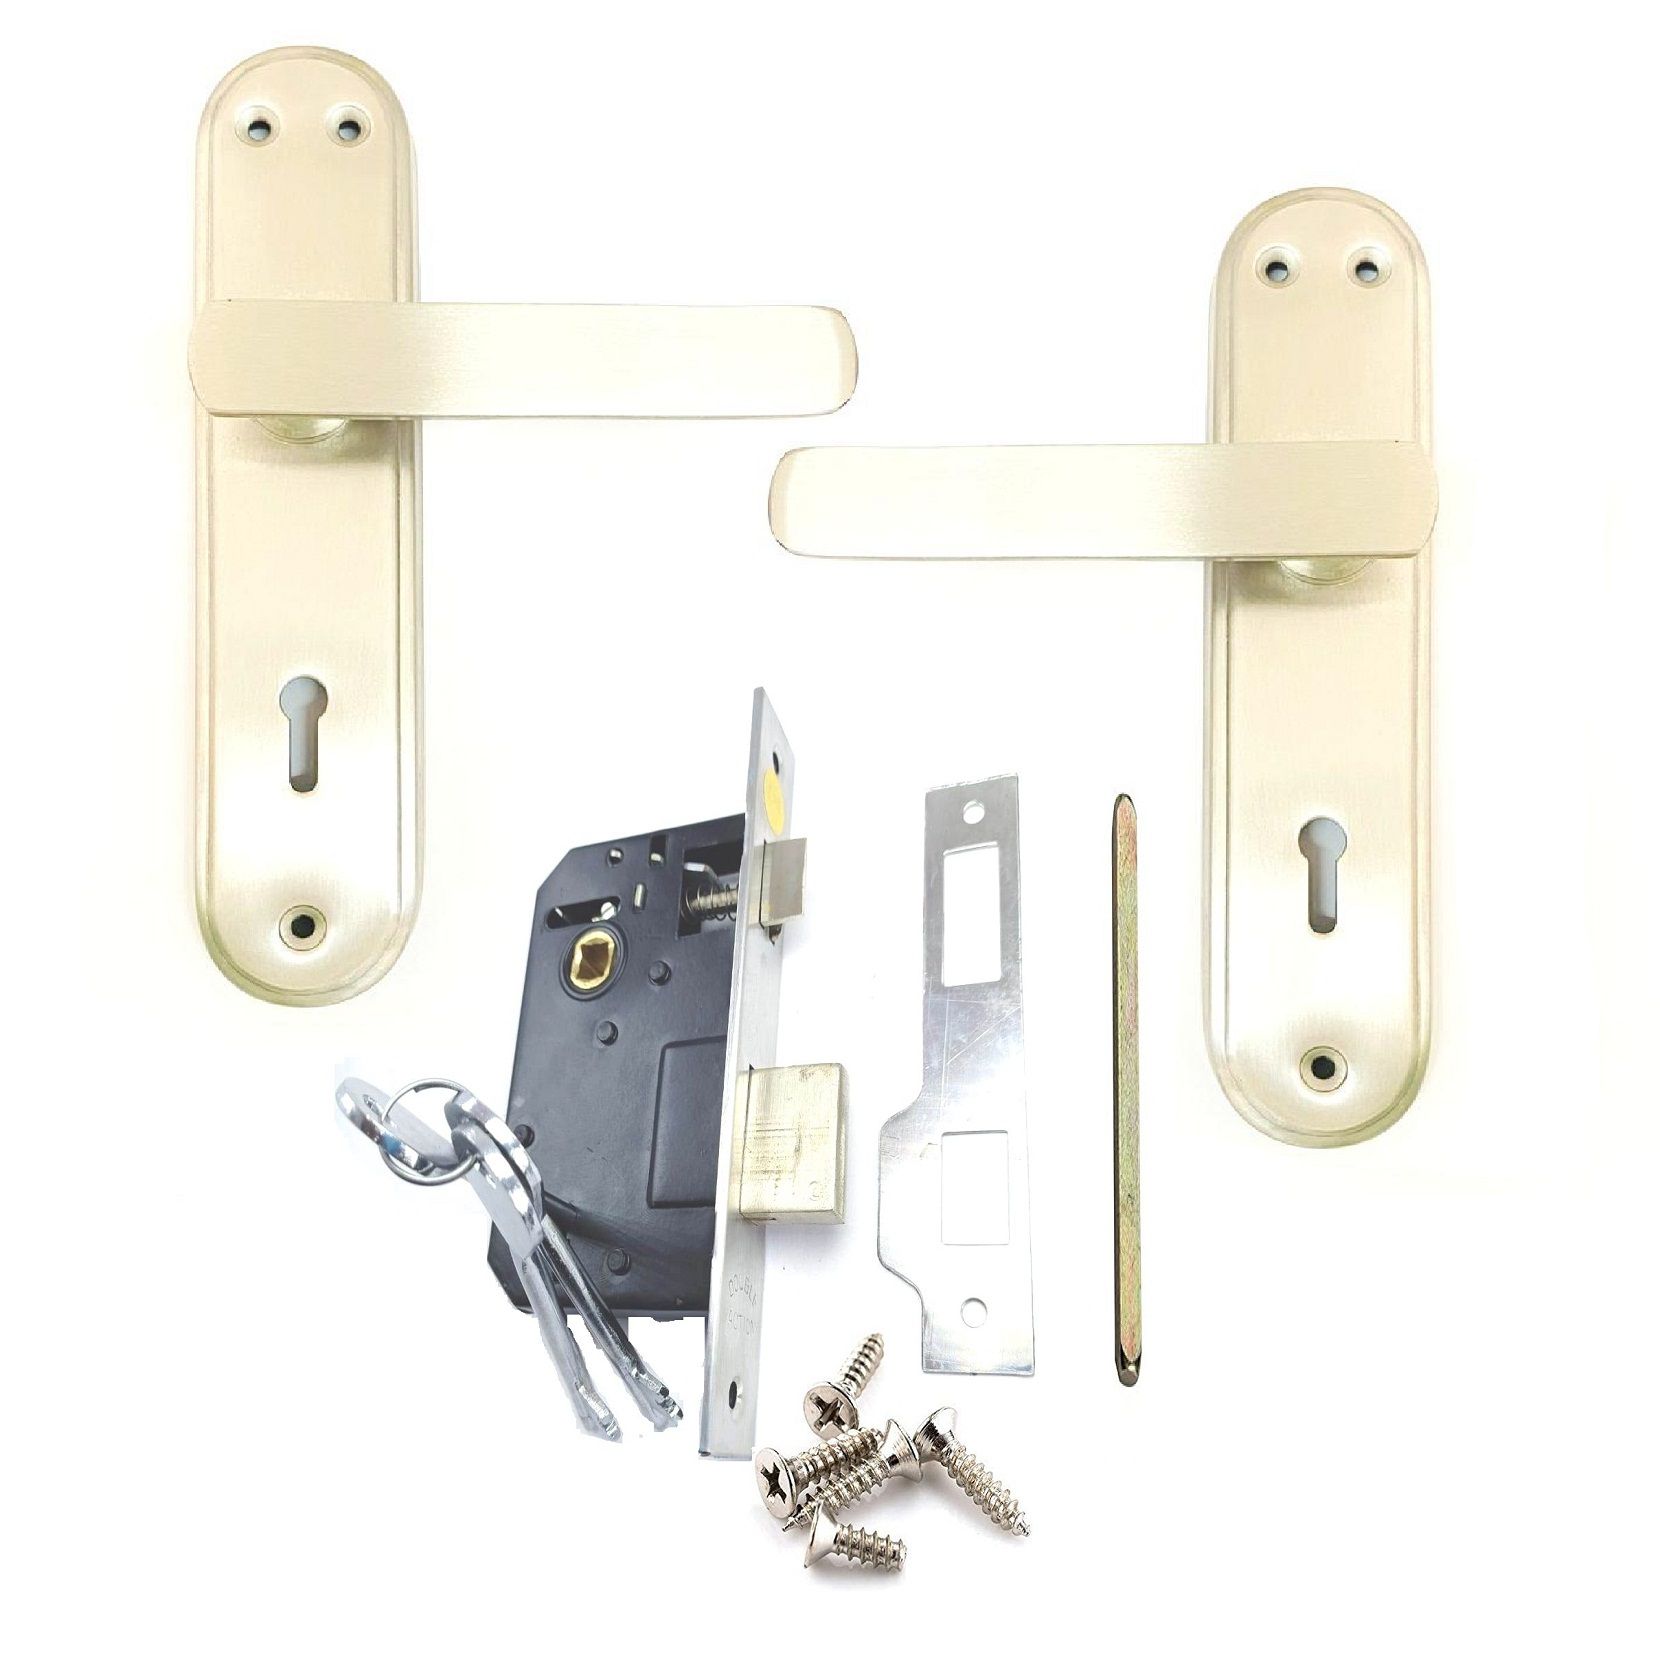     			ZTXON Stainless Steel Mortise Handle, K.Y. 7 inch Mortise Door Lock in Matt Finish With Stainless Steel Material Mortise Pair with Double Turn Lock (3 Keys) Two Sided Key Lock Set (LSDS65+ M307SS) (Set of 1)